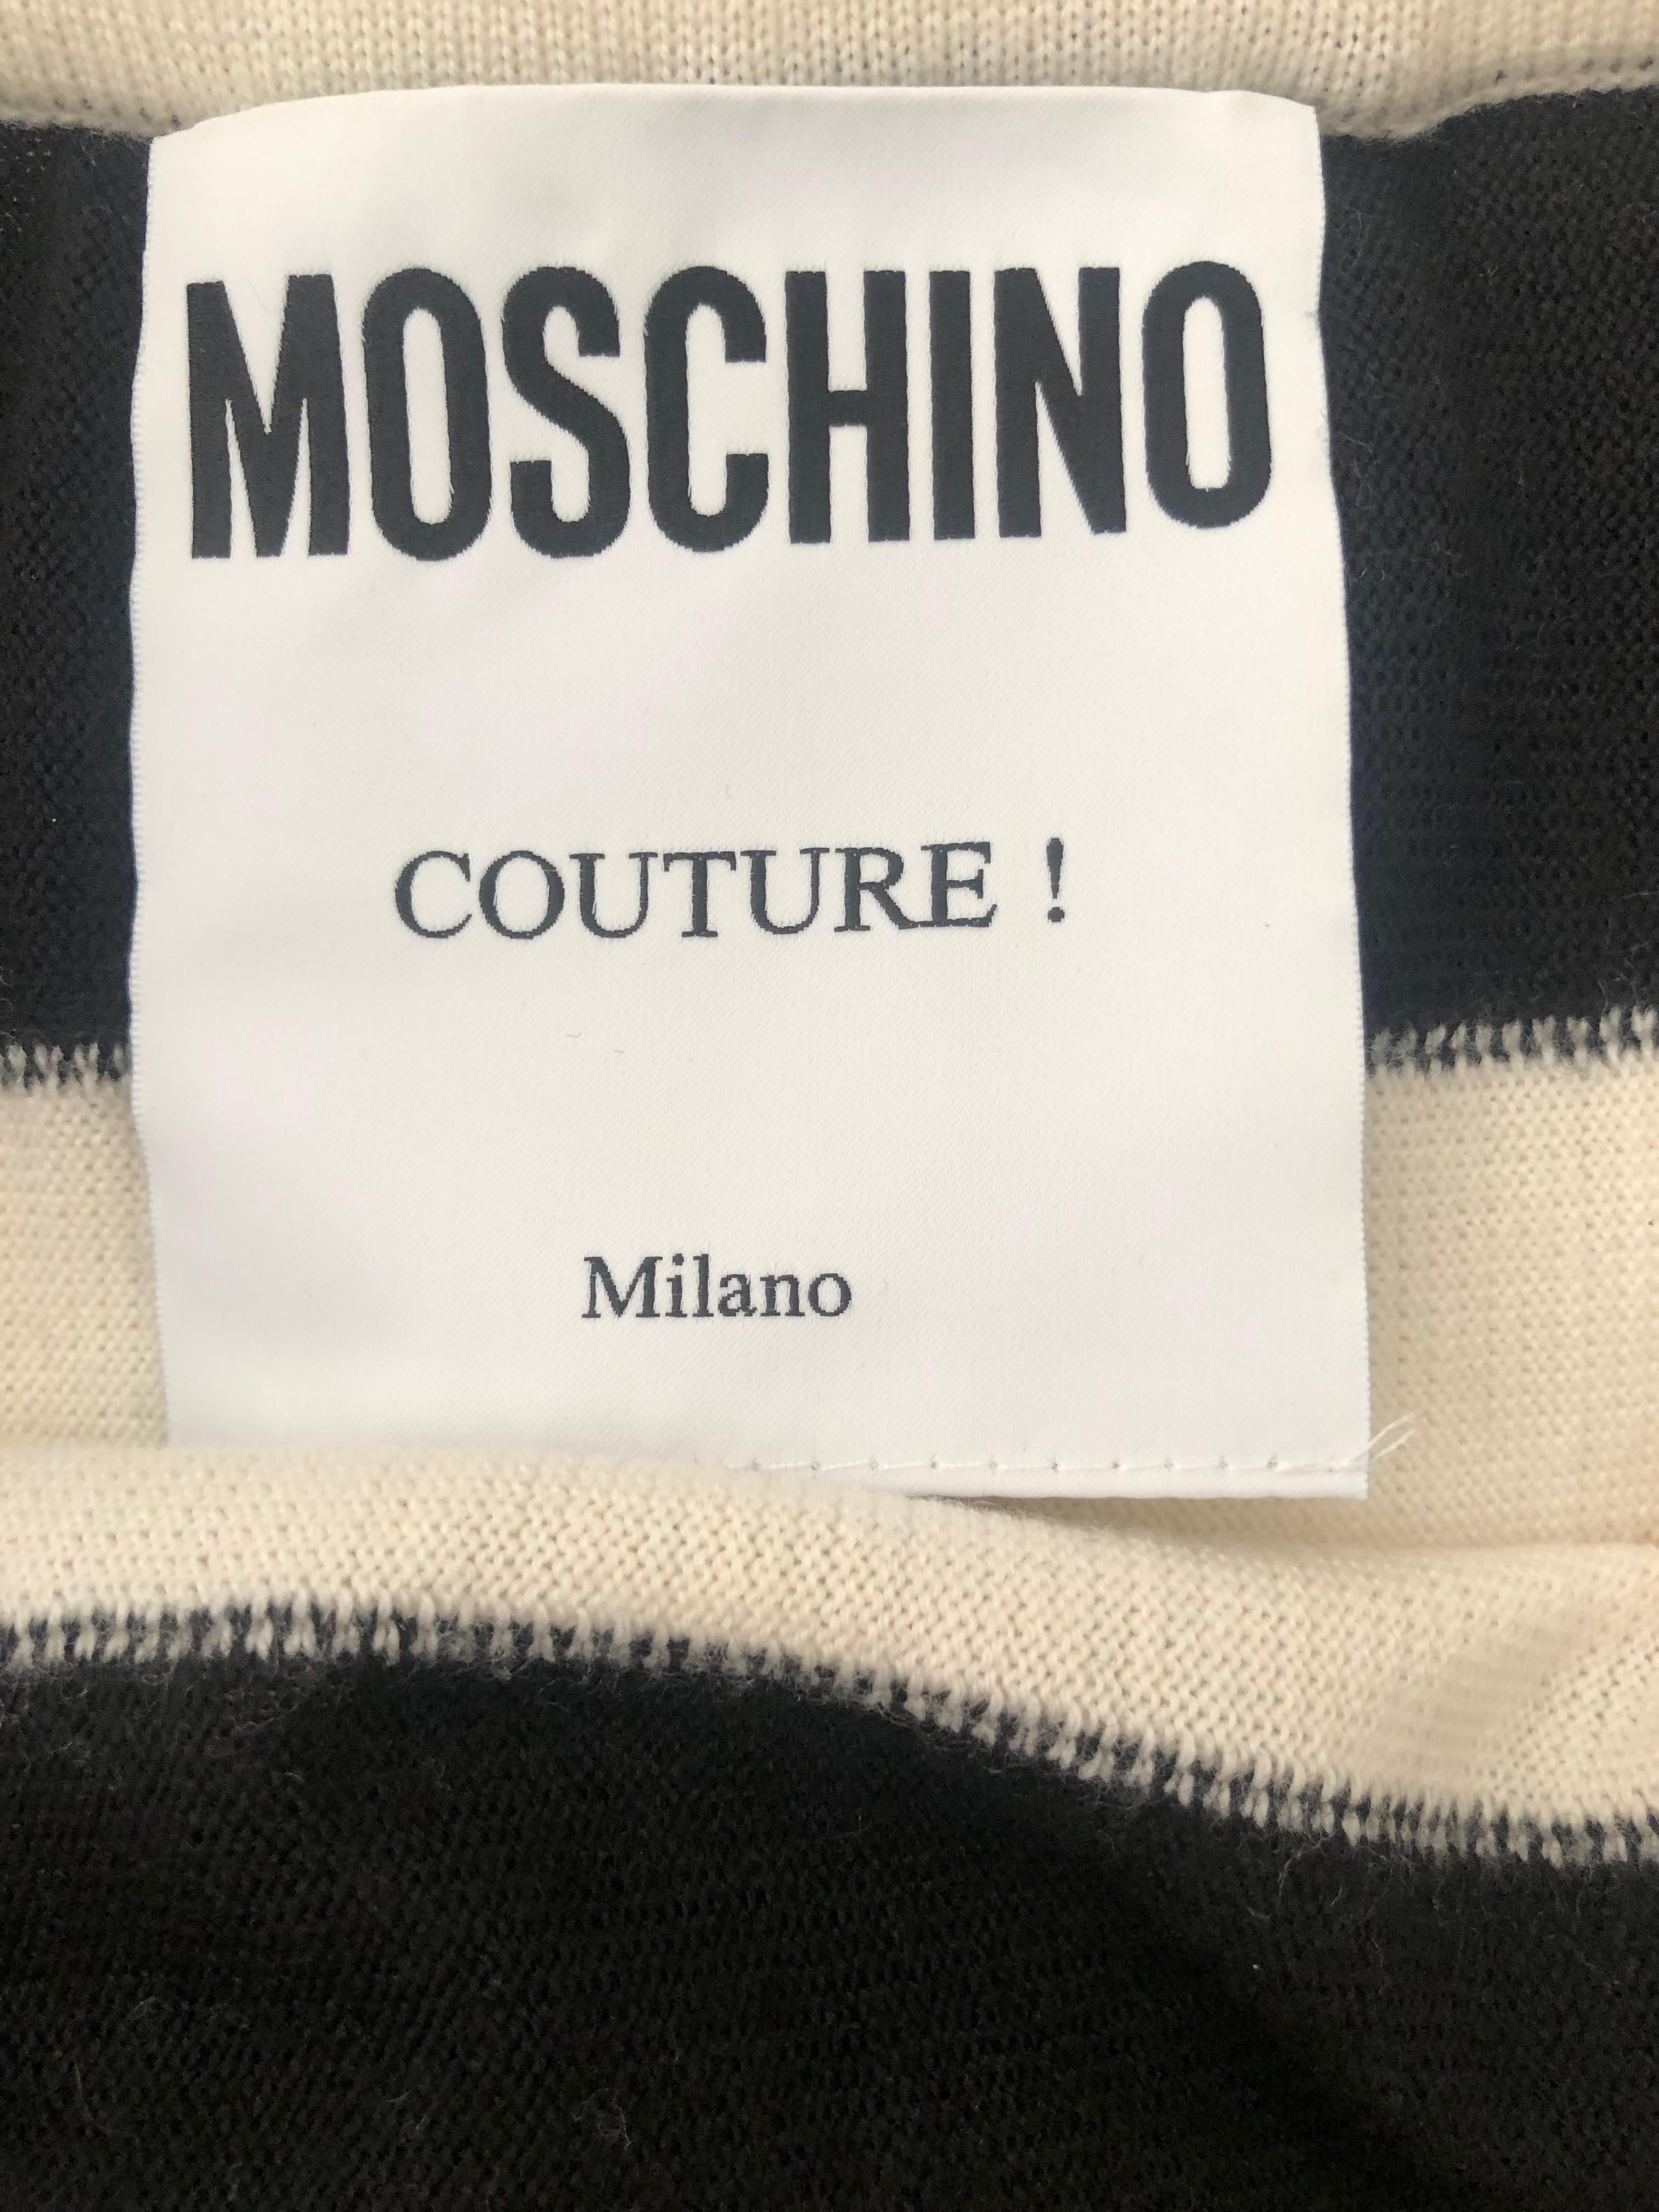 Moschino Couture 1990 Museum Exhibited 